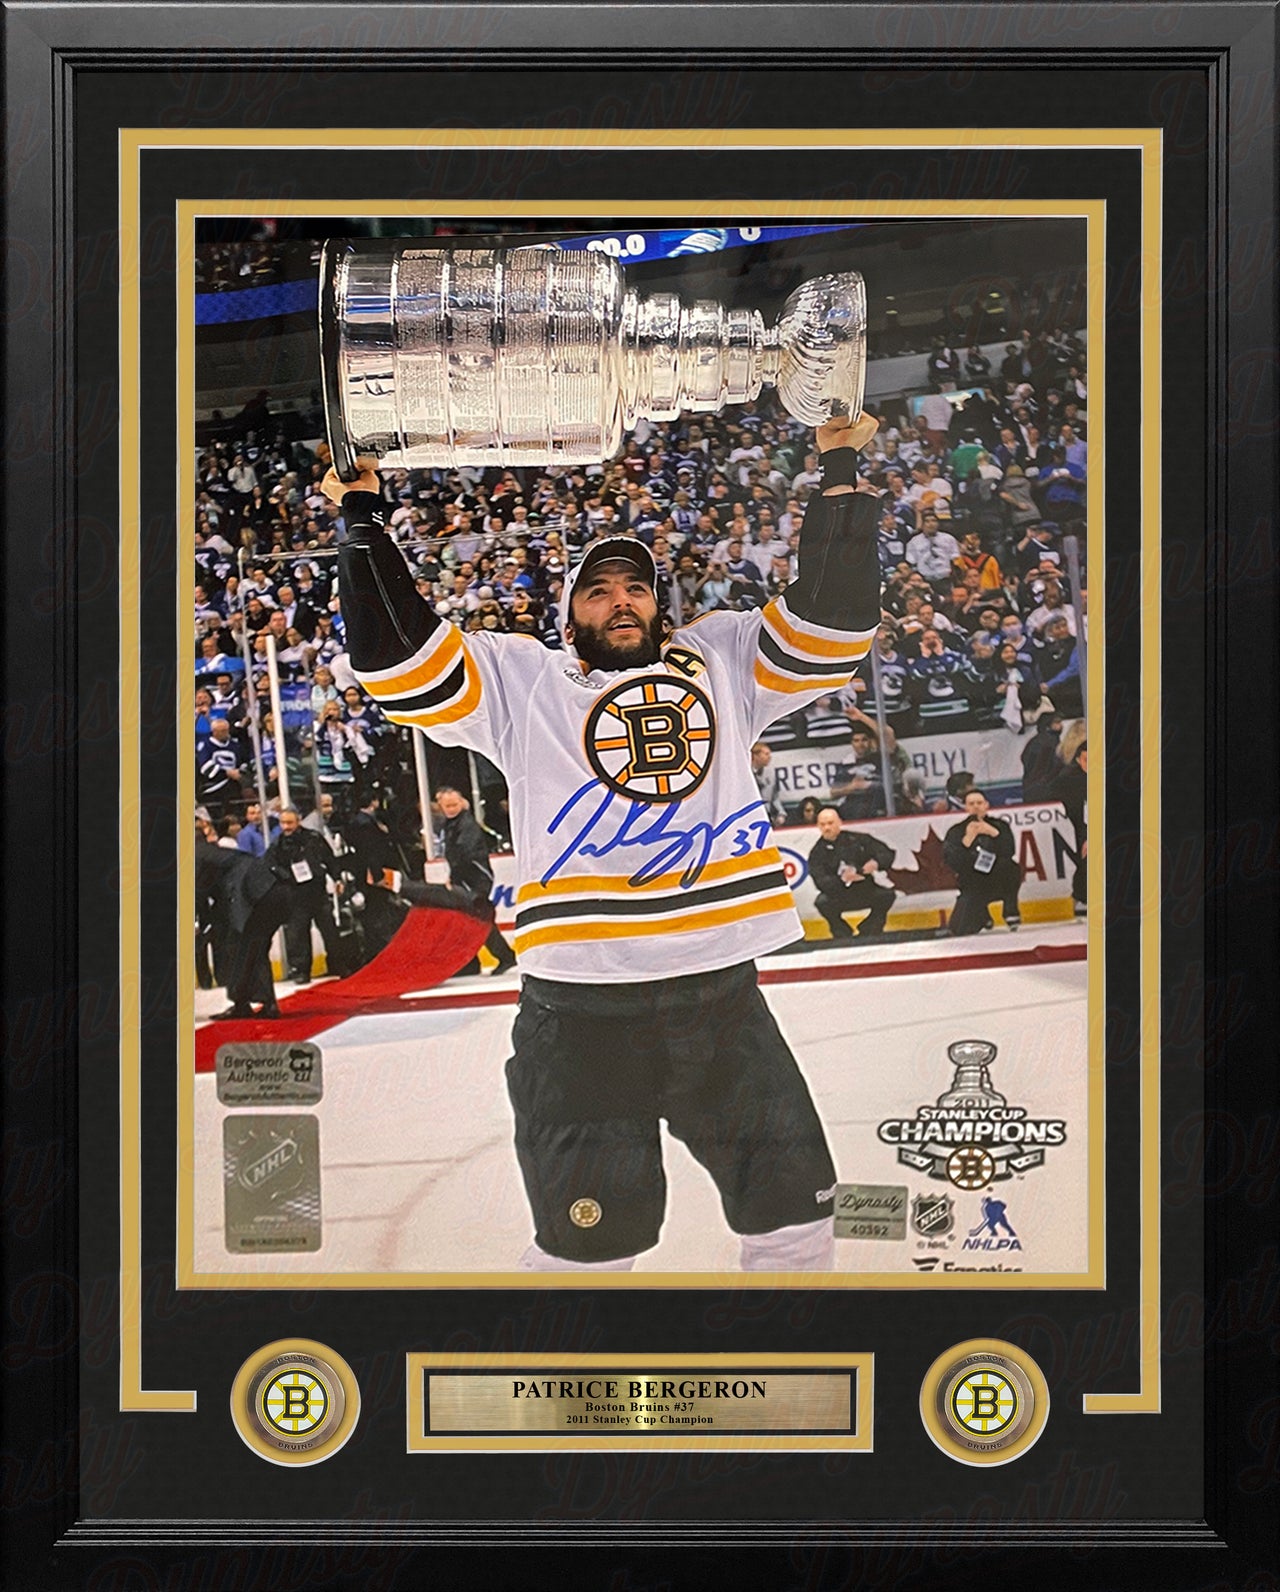 Patrice Bergeron 2011 Stanley Cup Boston Bruins Autographed 11" x 14" Framed Hockey Photo